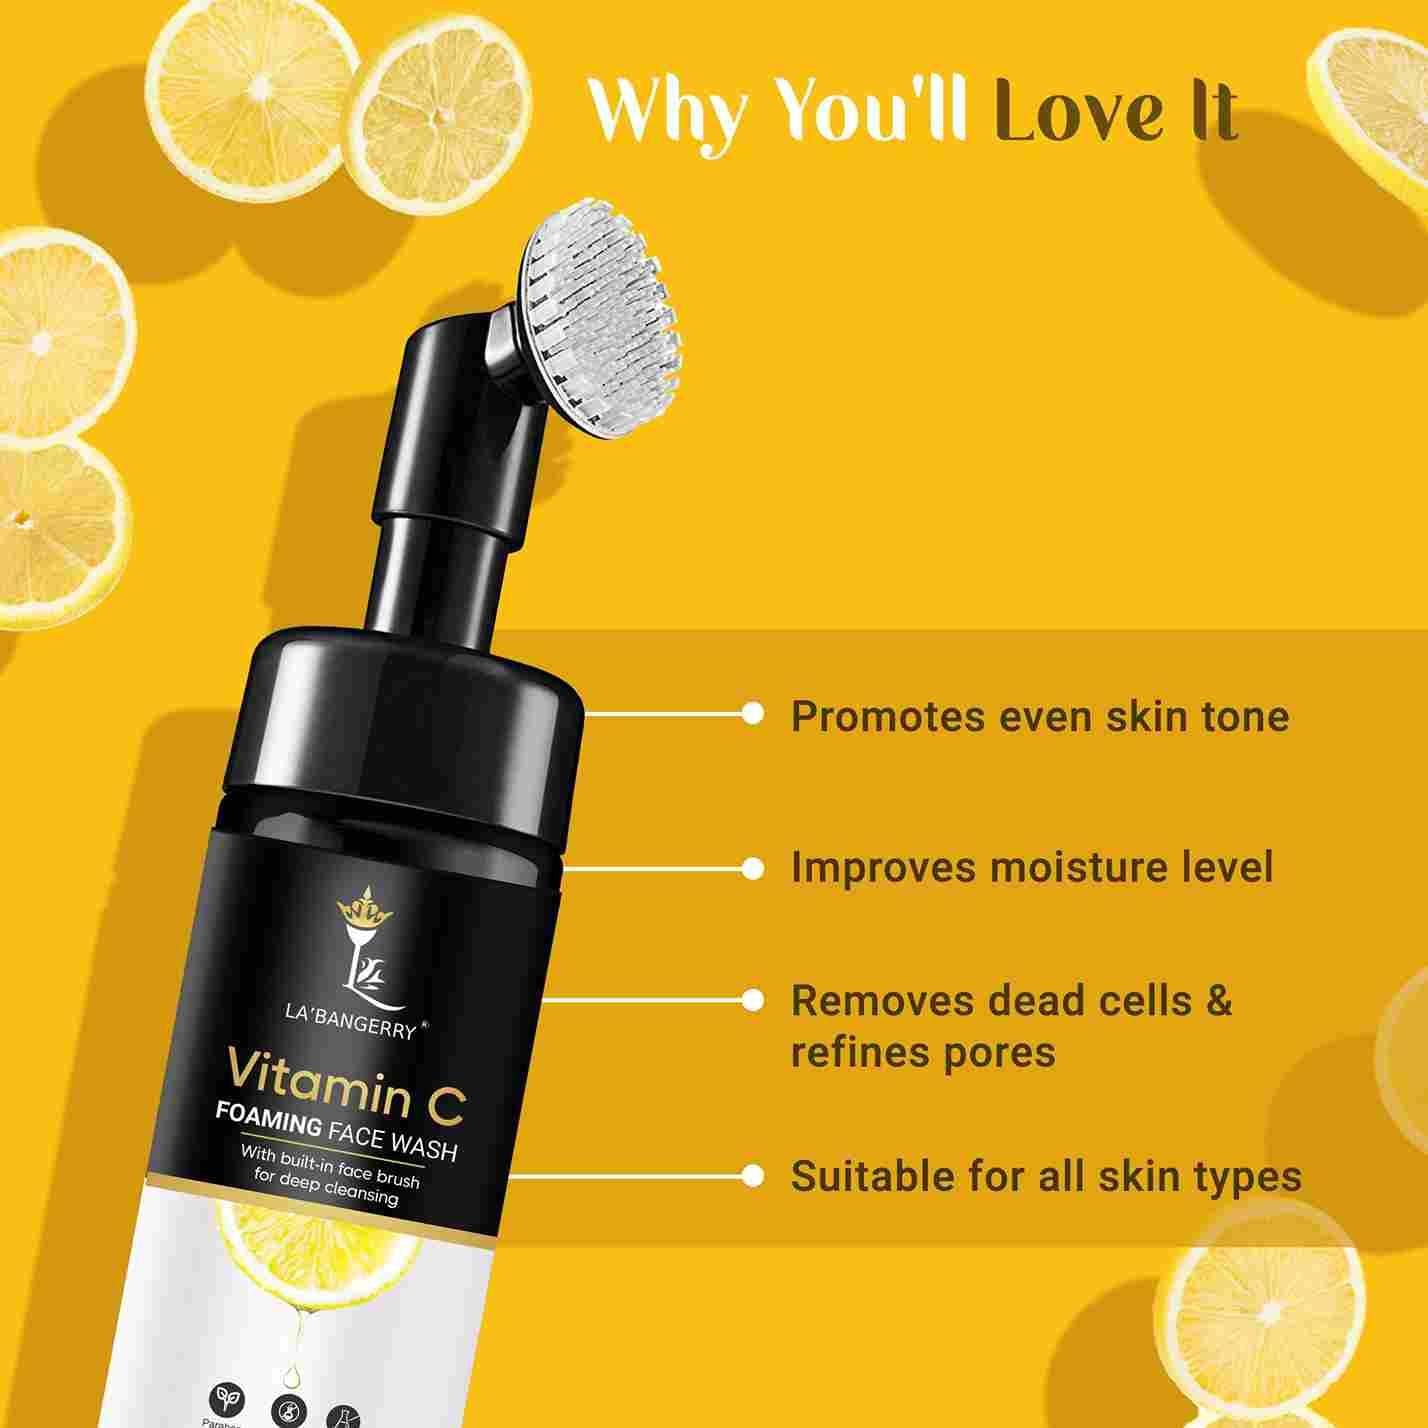 Vitamin C Brightening Foaming Face Wash with Built-In Brush 150ml Pack Of 2 - Deal IND.